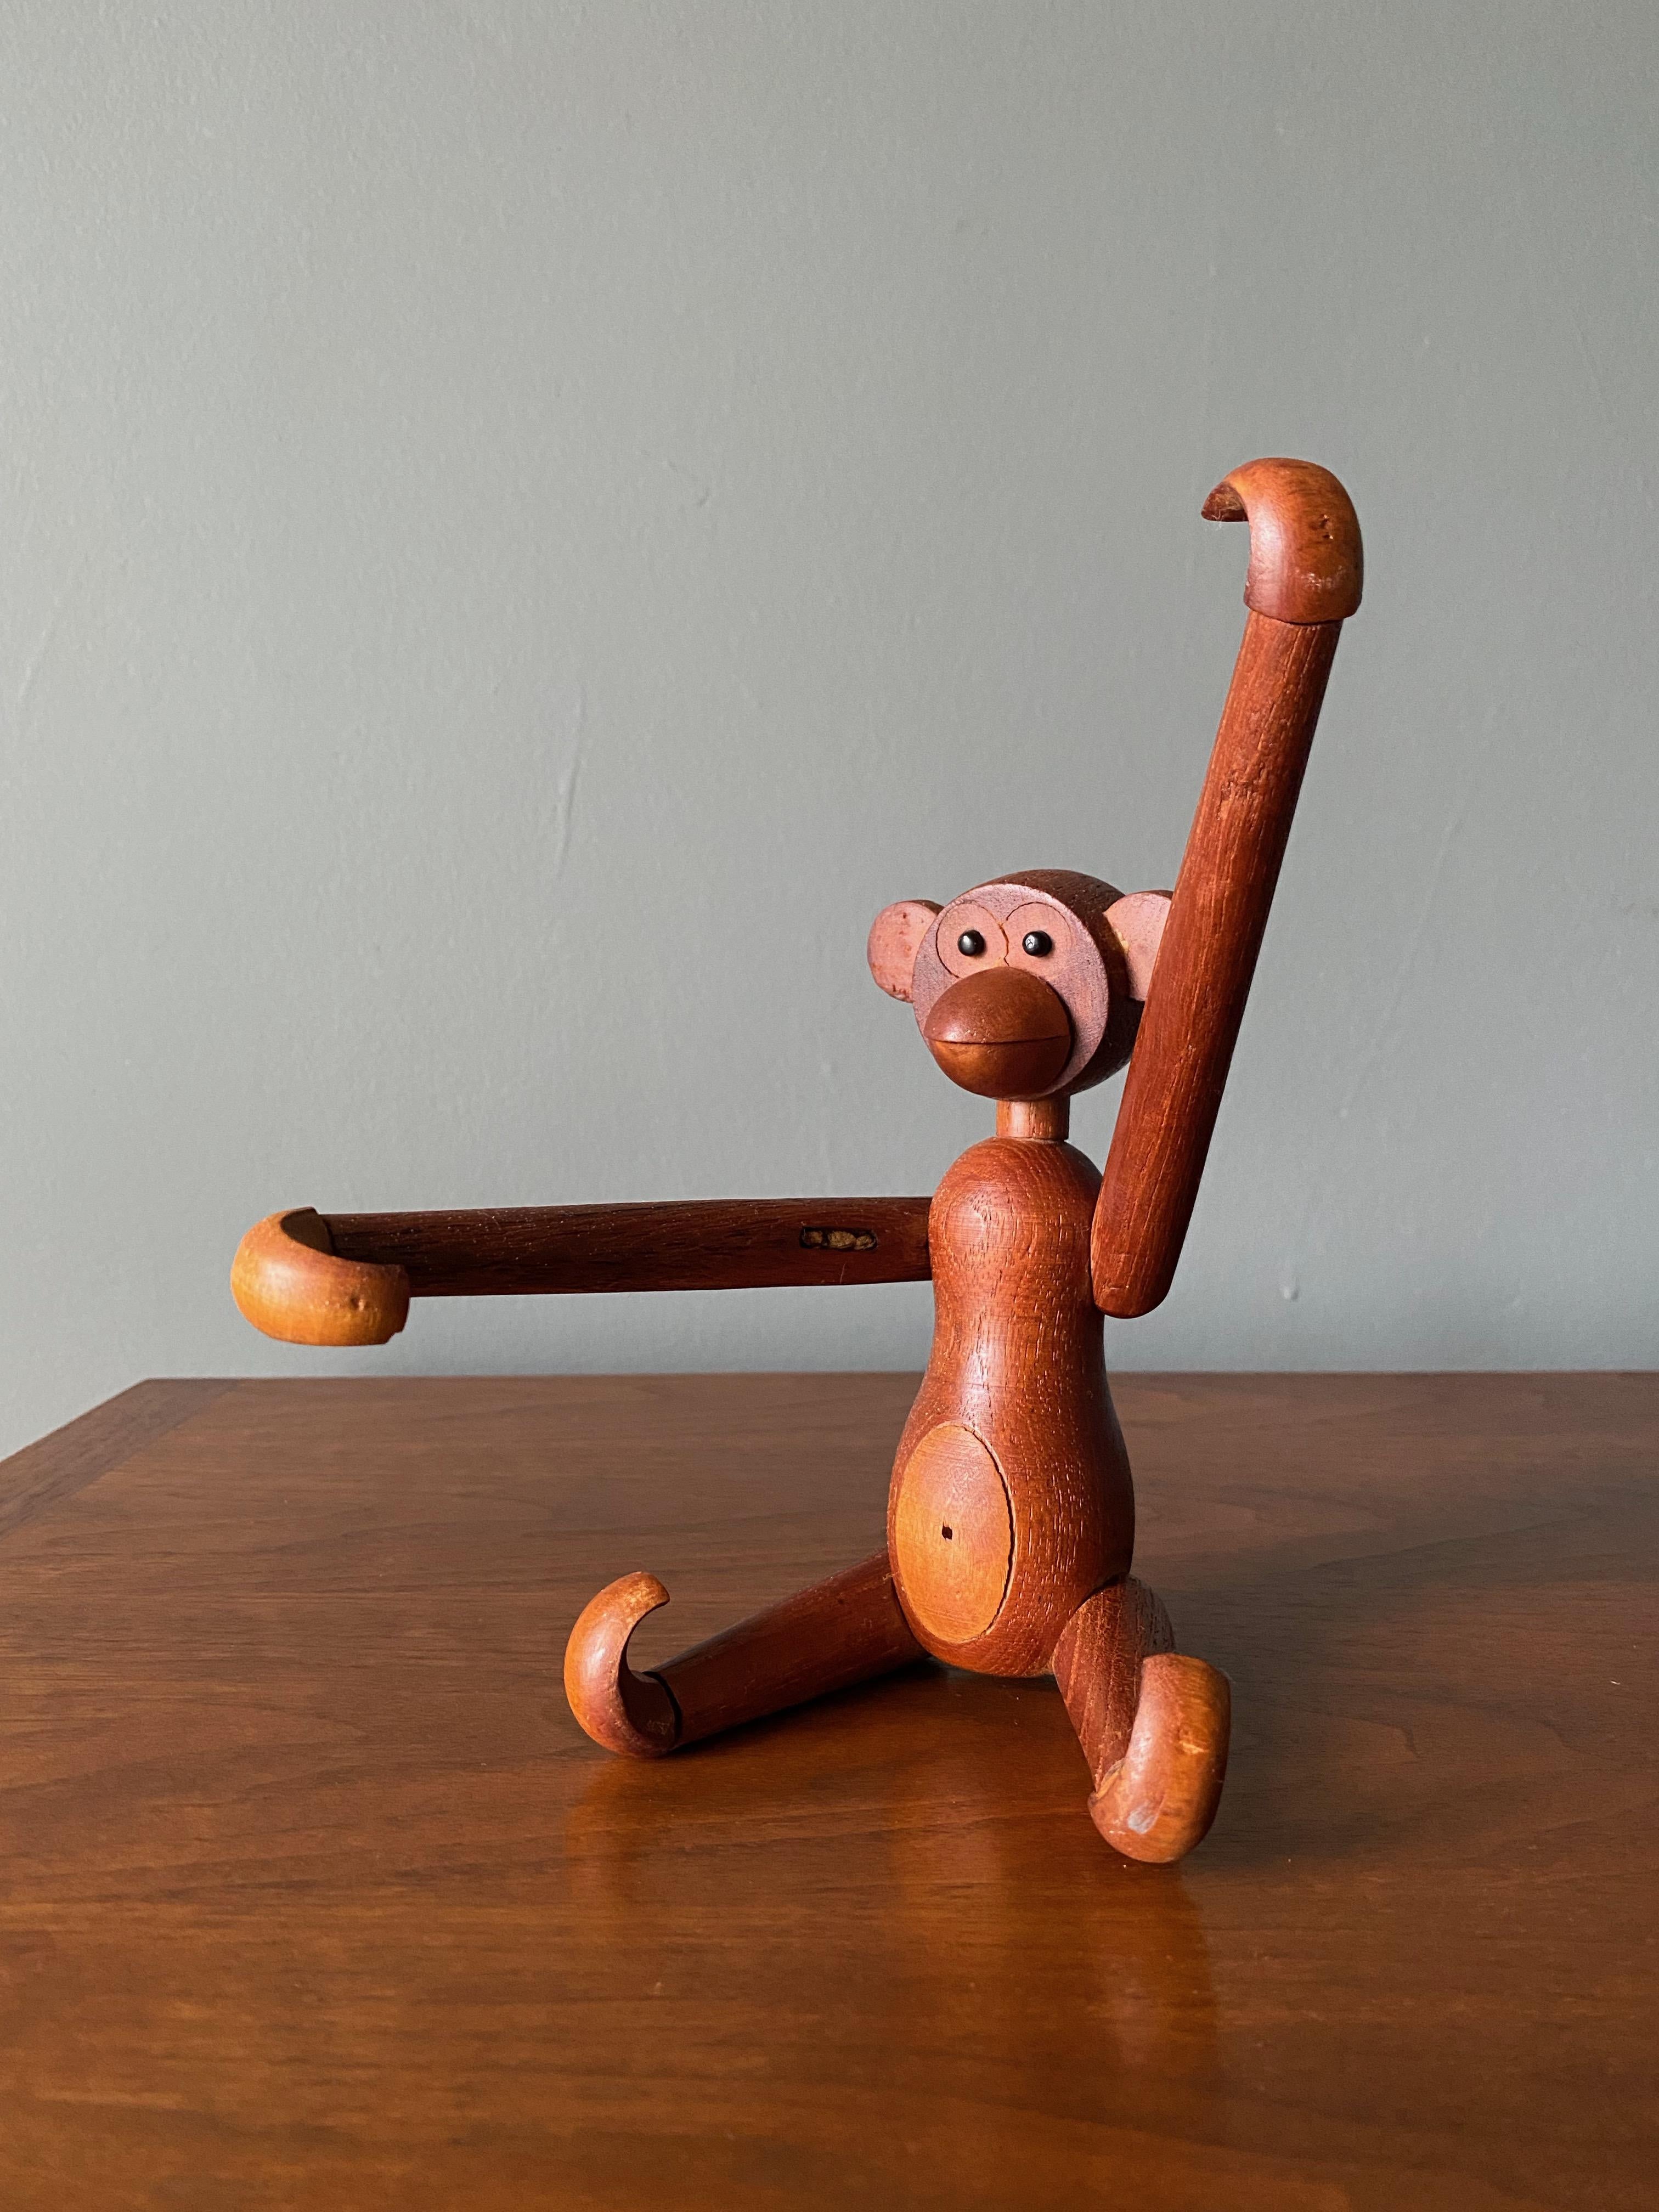 Vintage articulated teak monkey in the style of Kay Bojesen. A classic and iconic design. 
Measures 10